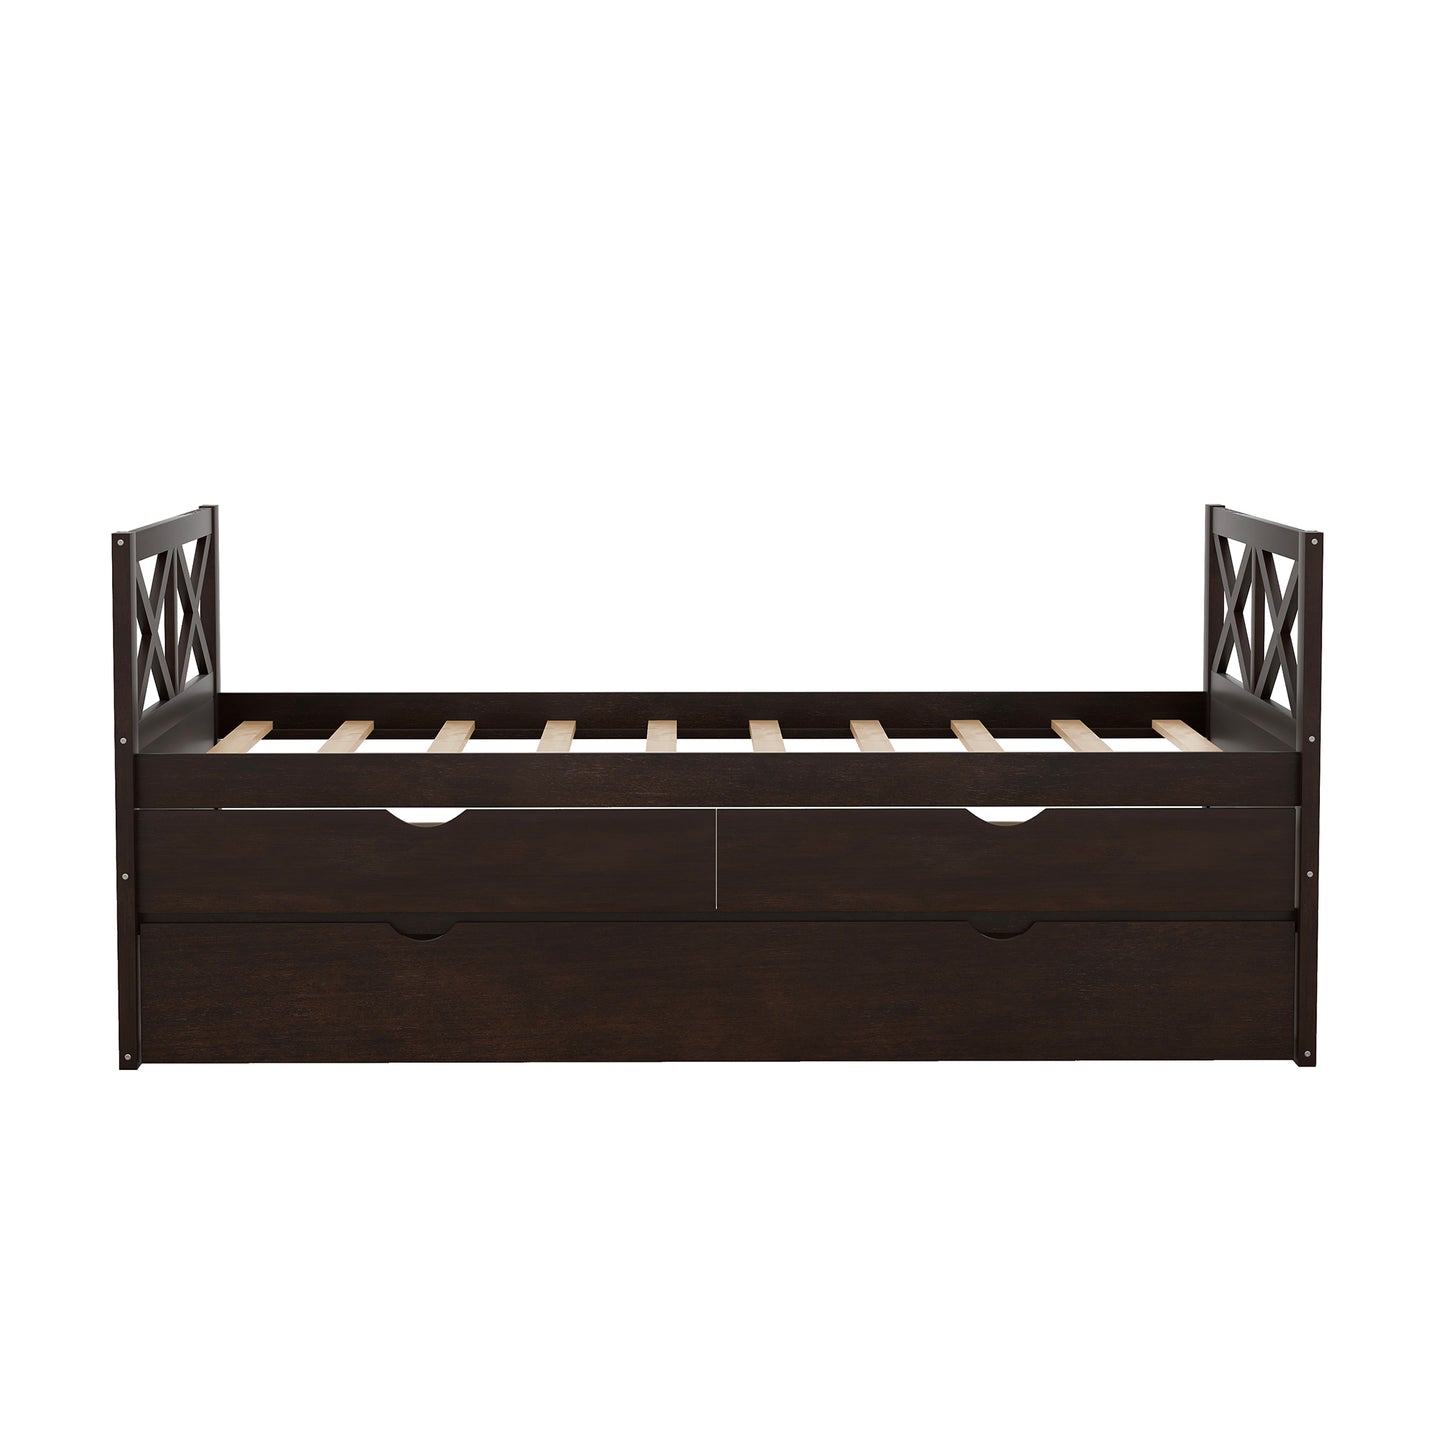 Multi-Functional Daybed with Drawers and Trundle, Espresso